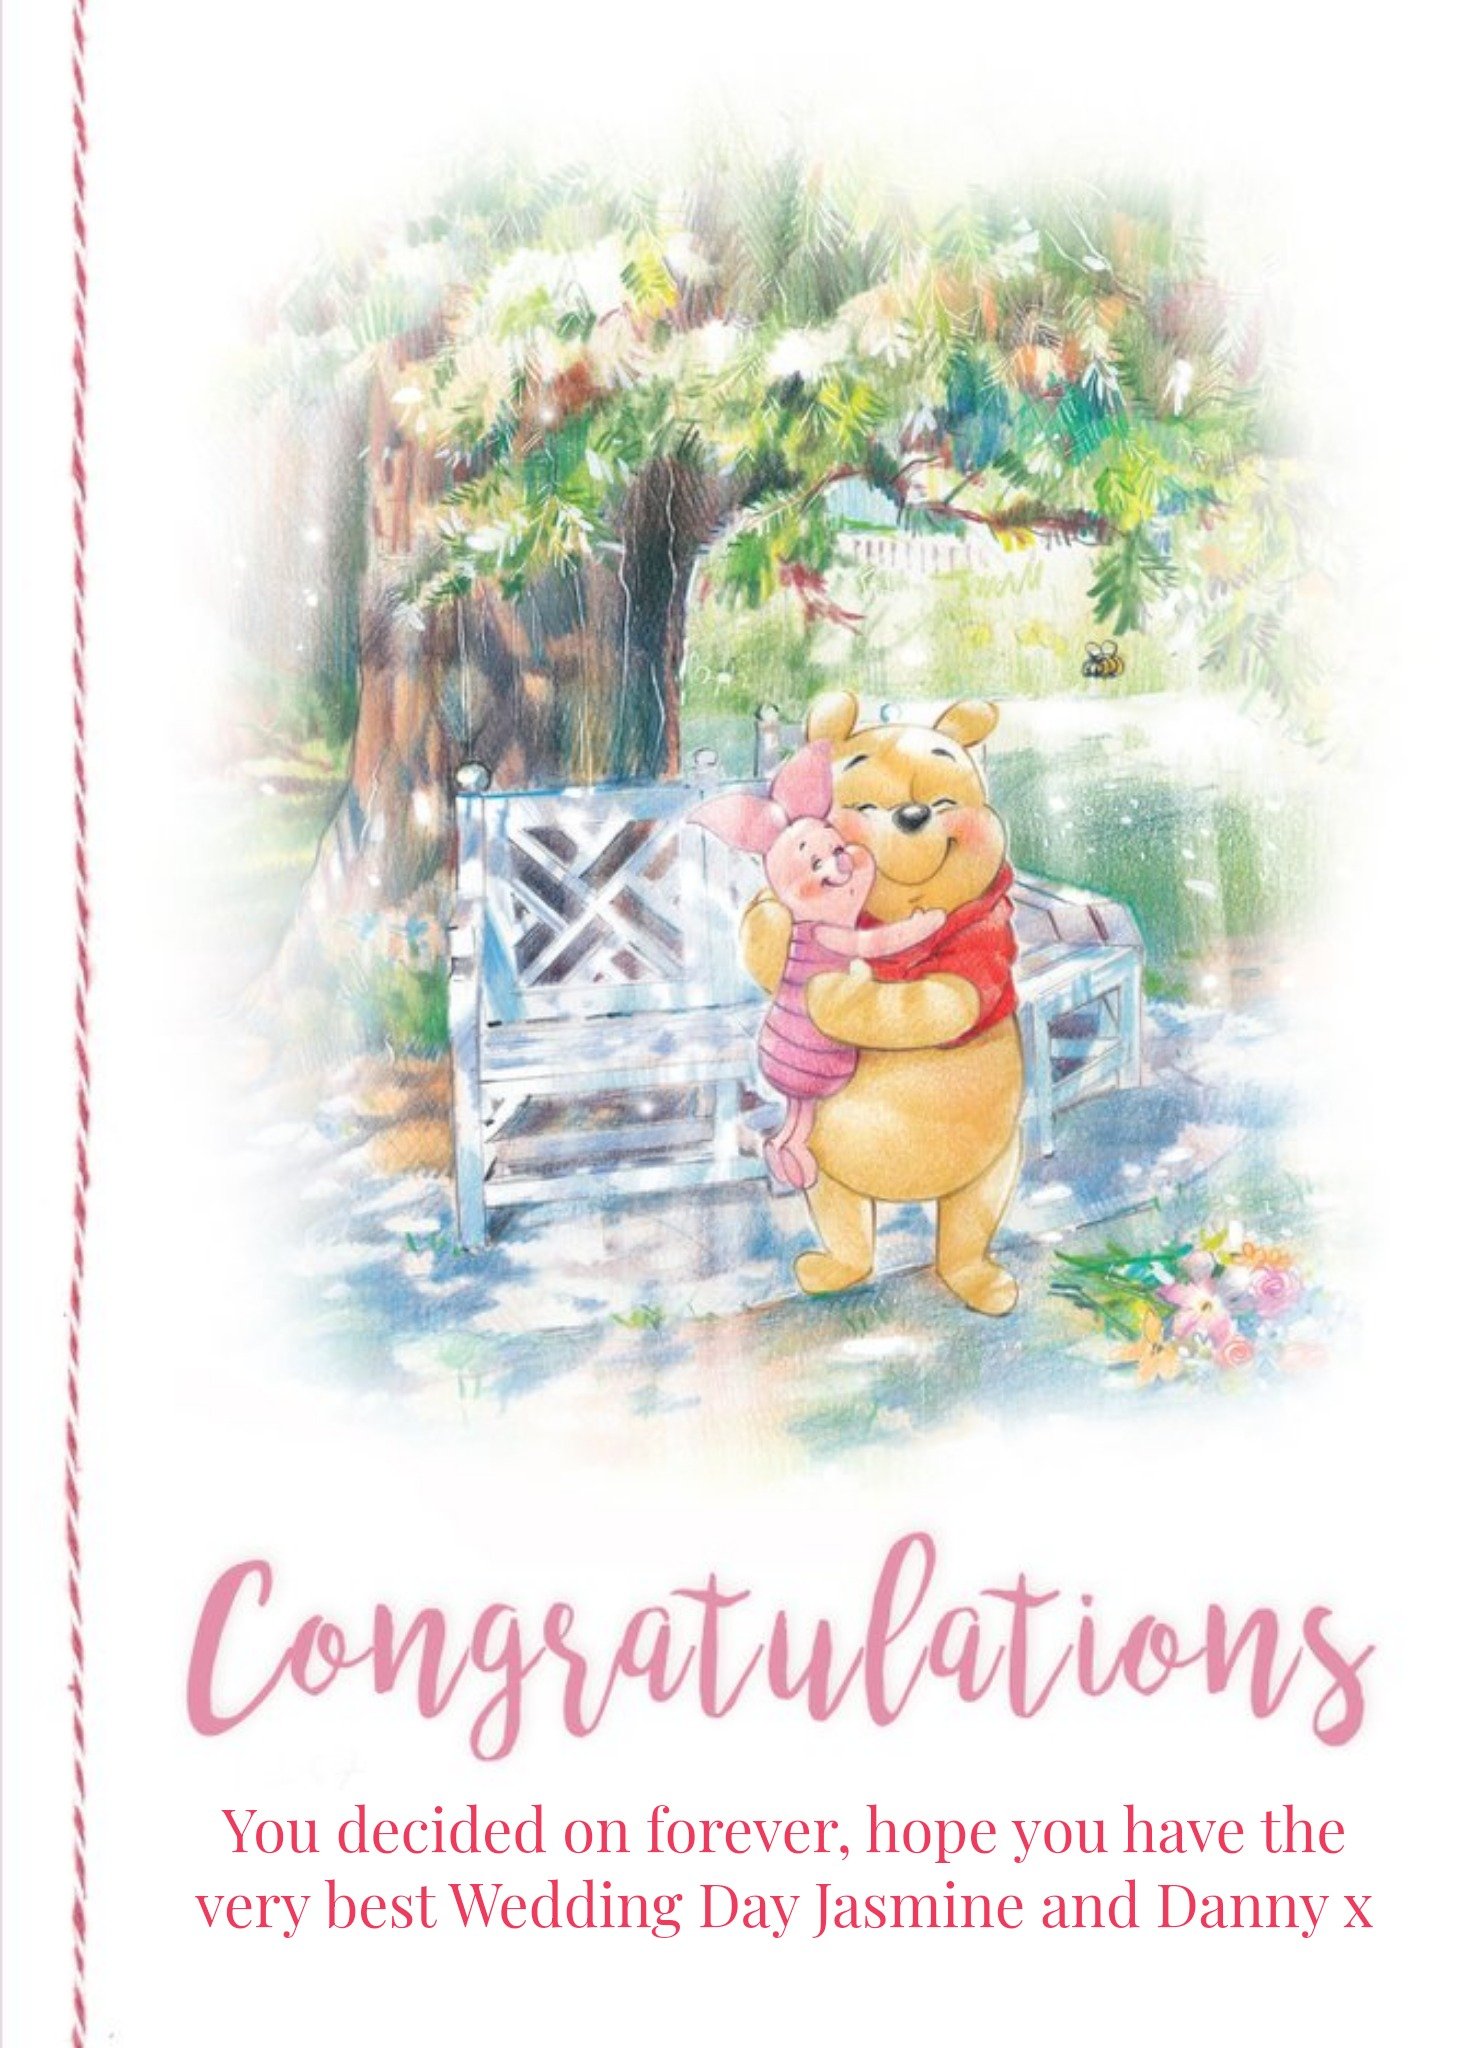 Disney Winnie The Pooh - Congratulations, You Decided On Forever, Large Card